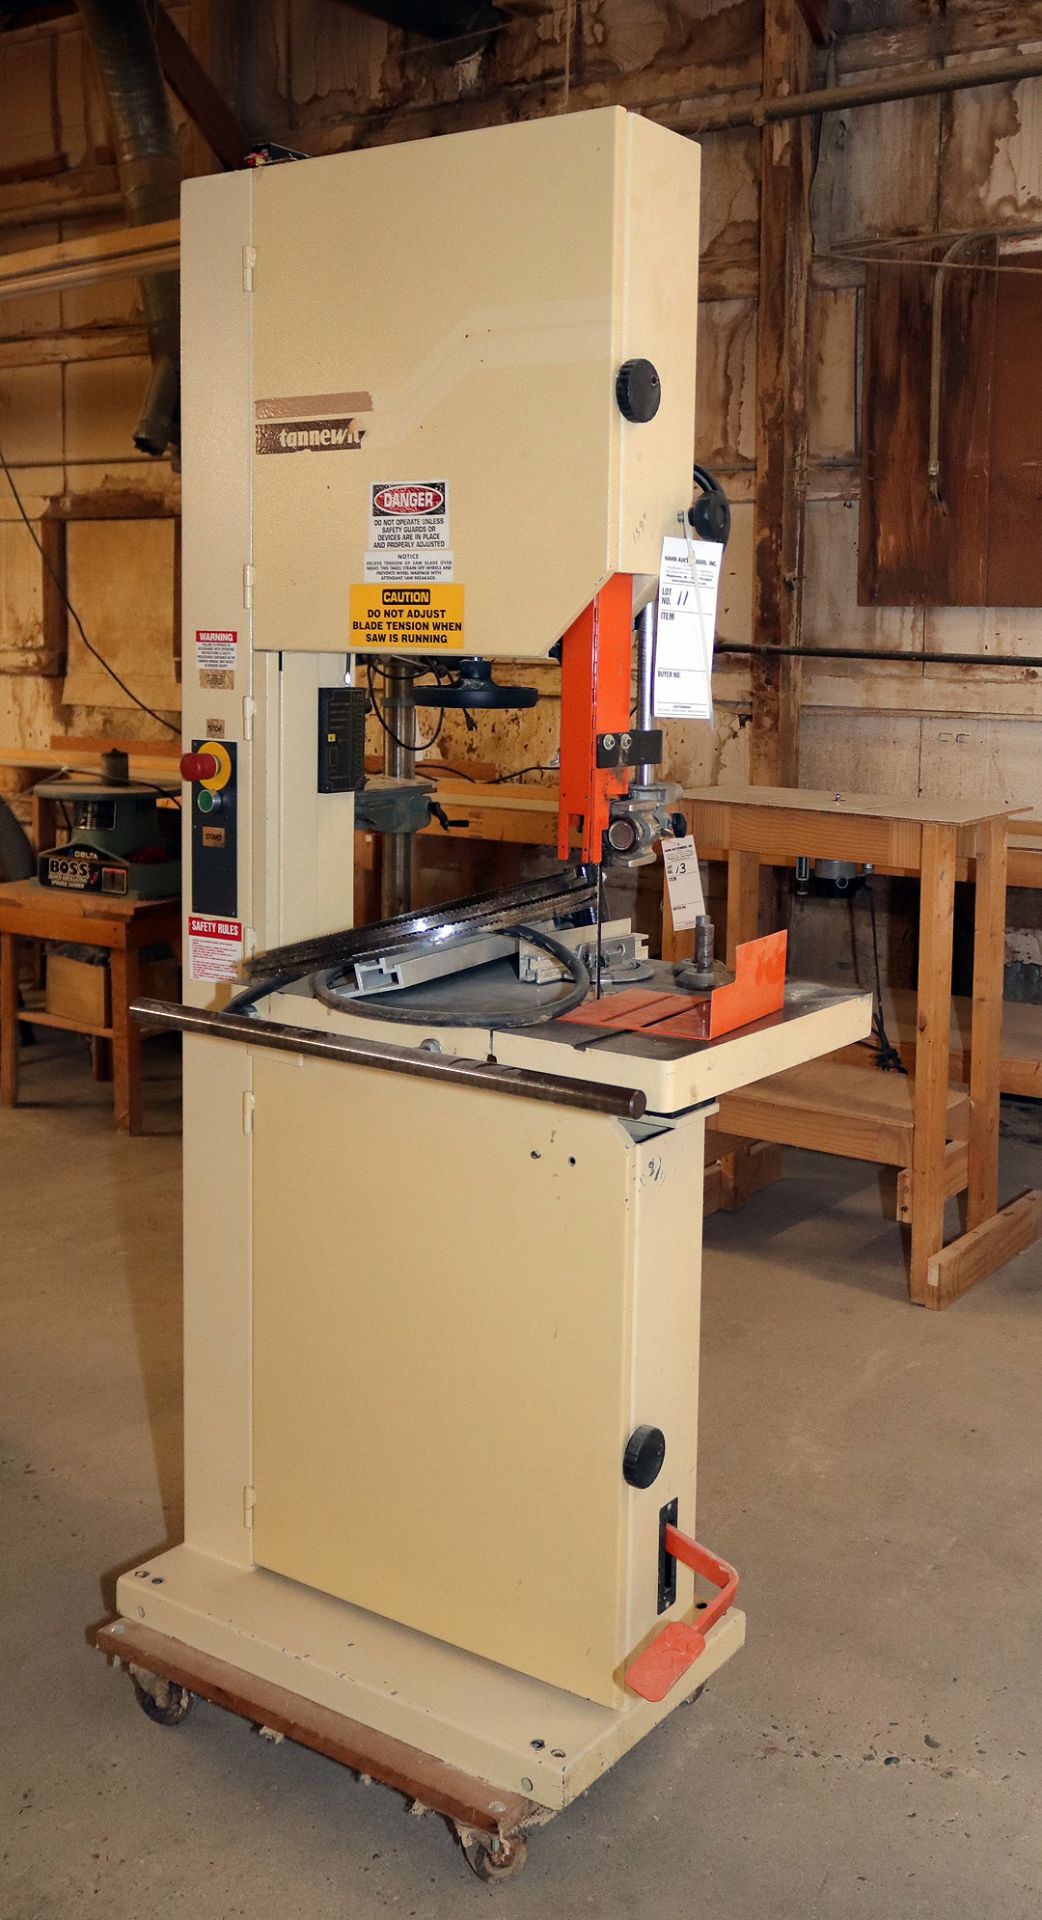 Tannewitz floor model band saw, 18" wide, 3 phase